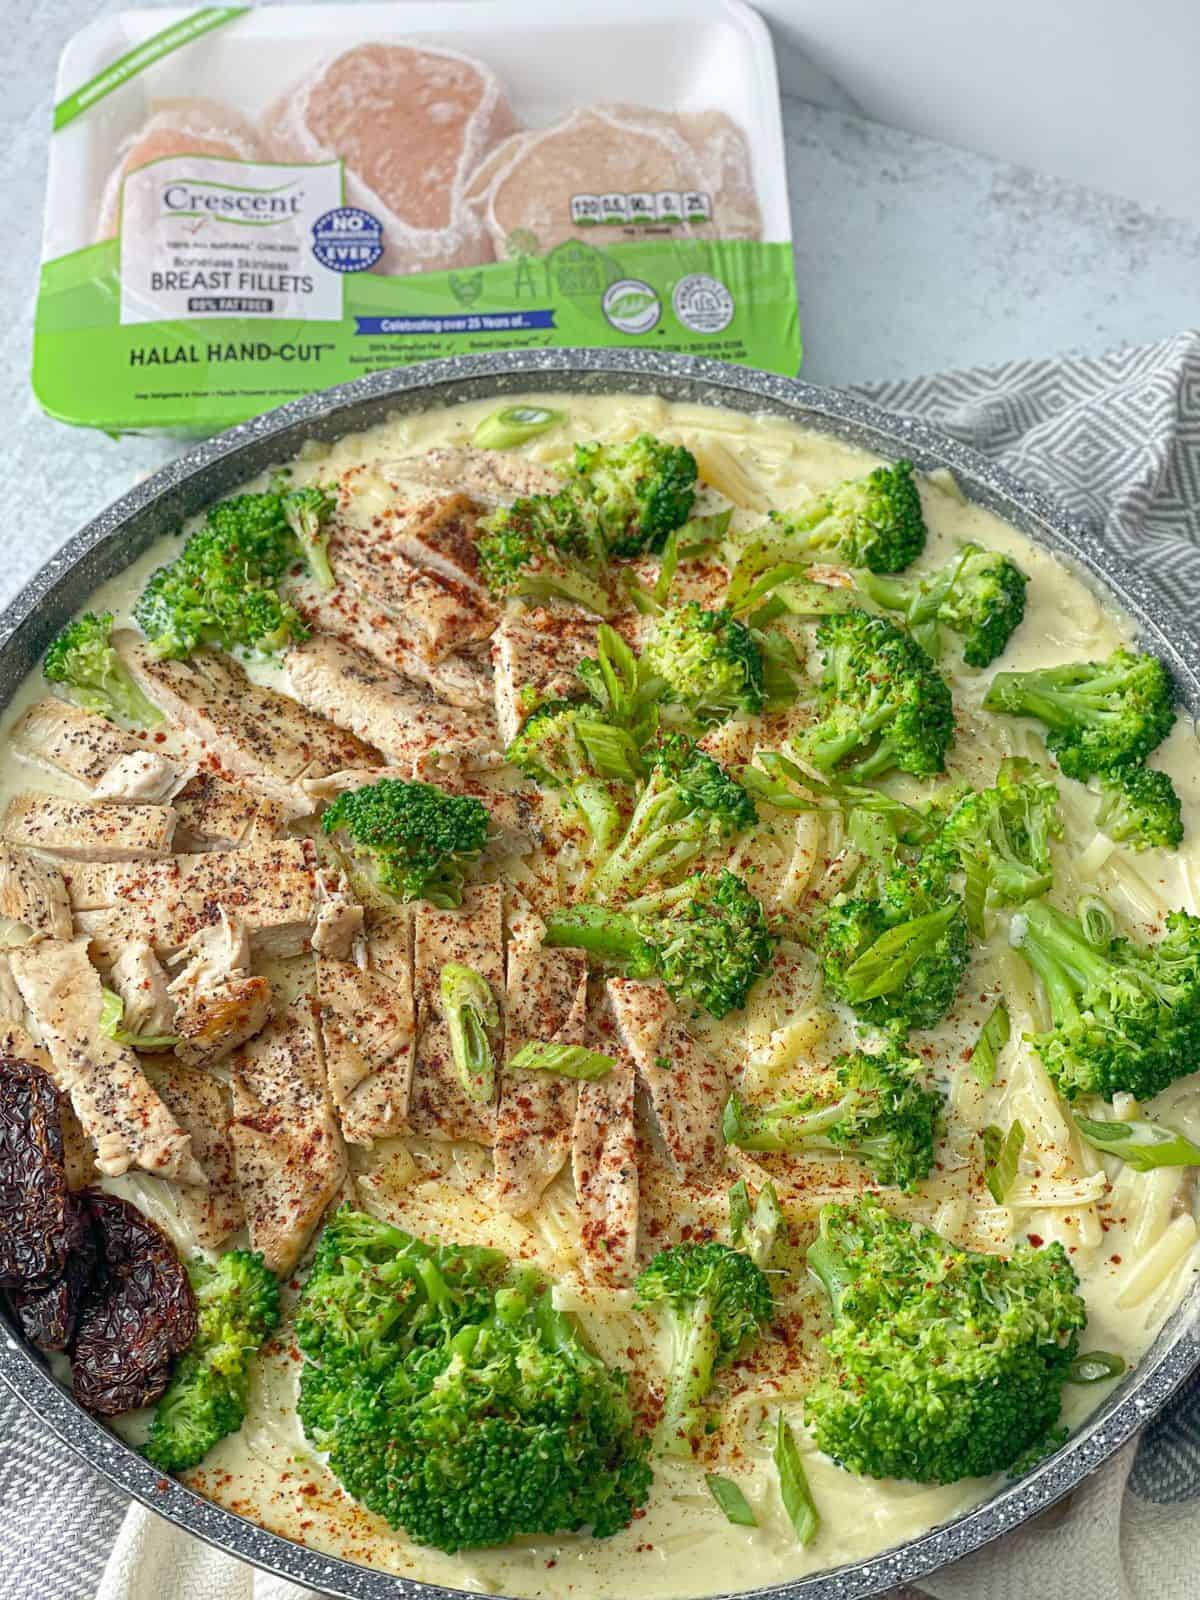 a pan of a pan of Chicken Fettuccine Alfredo made with butter, chicken breast, fettuccine noodles, and broccoli florets topped with grated parmesan